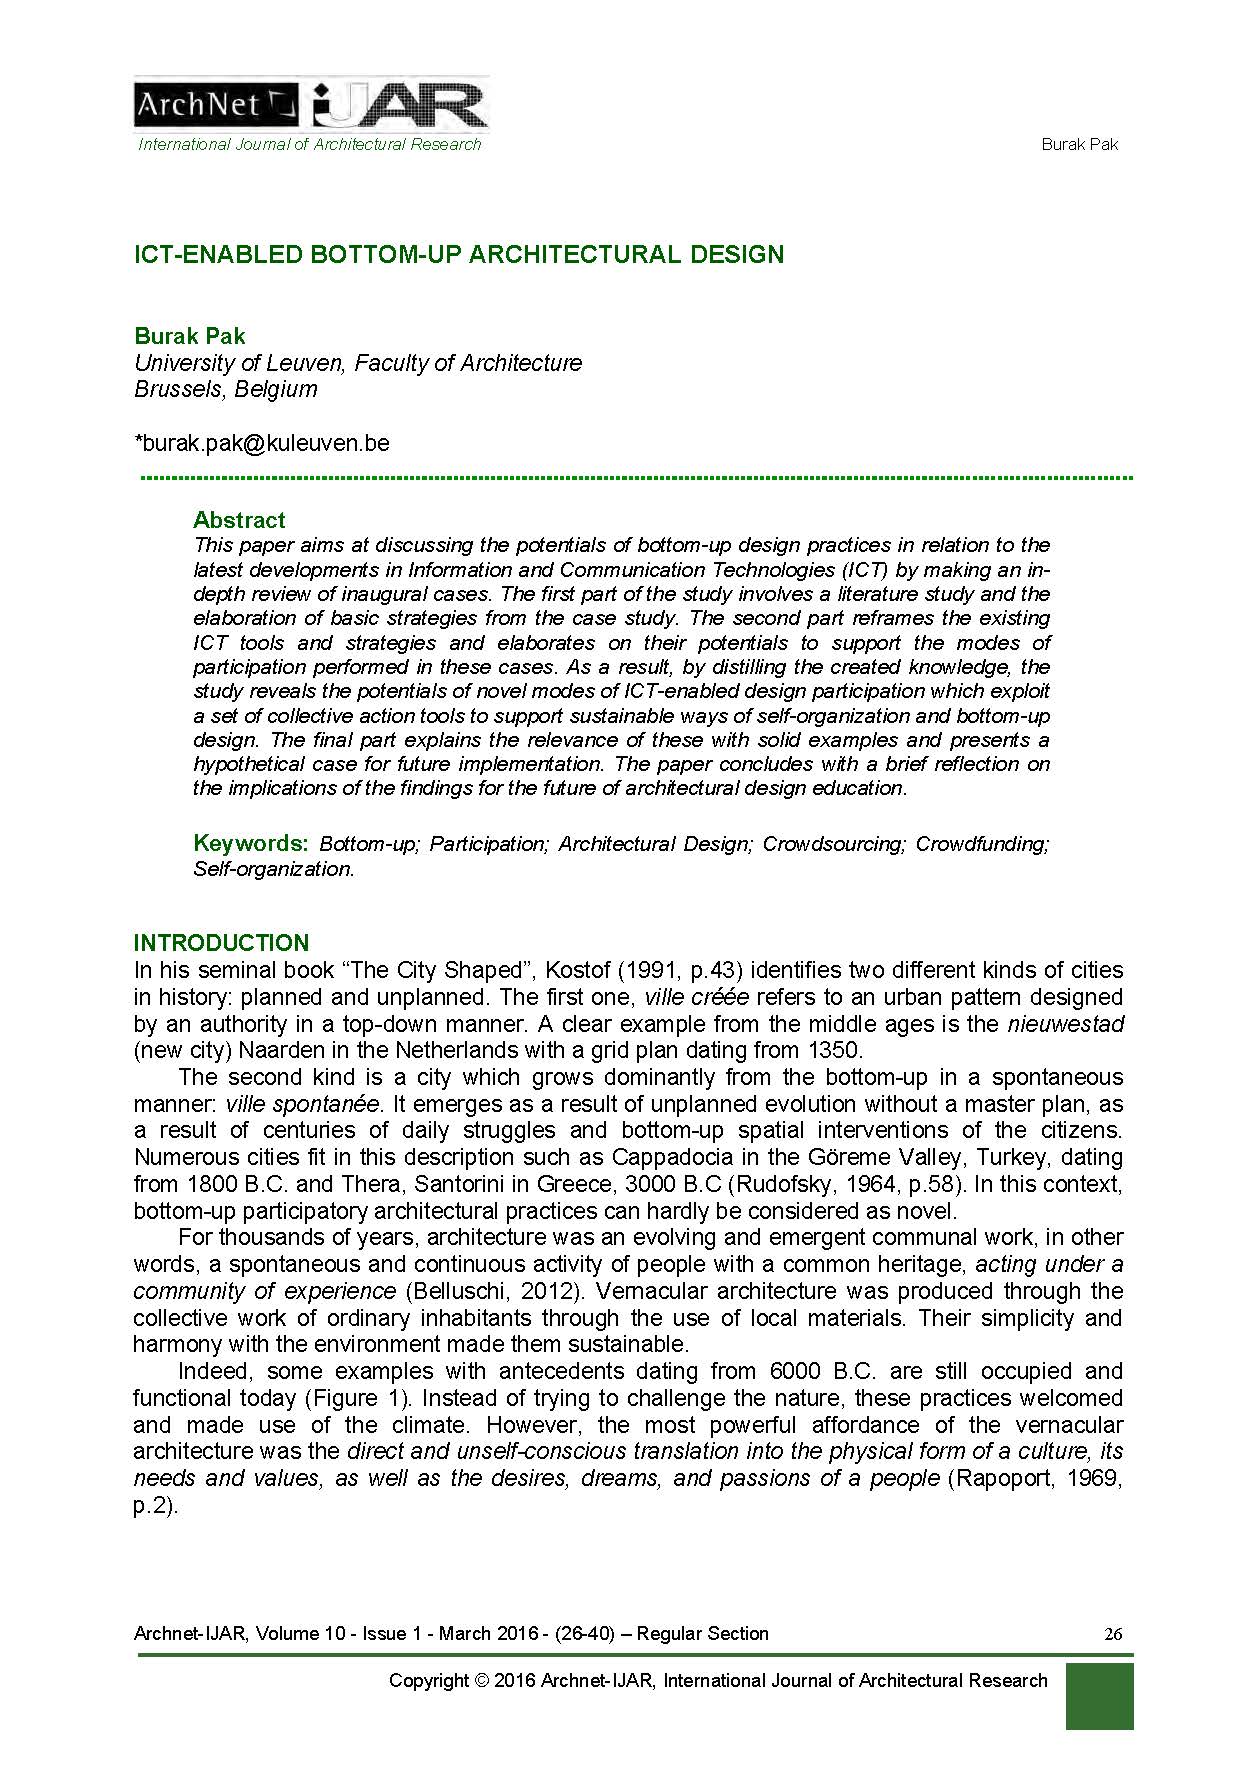 Burak Pak - <div>This paper aims at discussing the potentials of bottom-up design practices in relation to the latest developments in Information and Communication Technologies (ICT) by making an in-depth review of inaugural cases. The first part of the study involves a literature study and the elaboration of basic strategies from the case study. The second part reframes the existing ICT tools and strategies and elaborates on their potentials to support the modes of participation performed in these cases. As a result, by distilling the created knowledge, the study reveals the potentials of novel modes of ICT-enabled design participation which exploit a set of collective action tools to support sustainable ways of self-organization and bottom-up design. The final part explains the relevance of these with solid examples and presents a hypothetical case for future implementation. The paper concludes with a brief reflection on the implications of the findings for the future of architectural design education.</div><div><br></div><div><span style="font-weight: bold;">Keywords</span></div><div>Bottom-up; Participation; Architectural Design; Crowdsourcing; Crowdfunding; Self-organization</div>